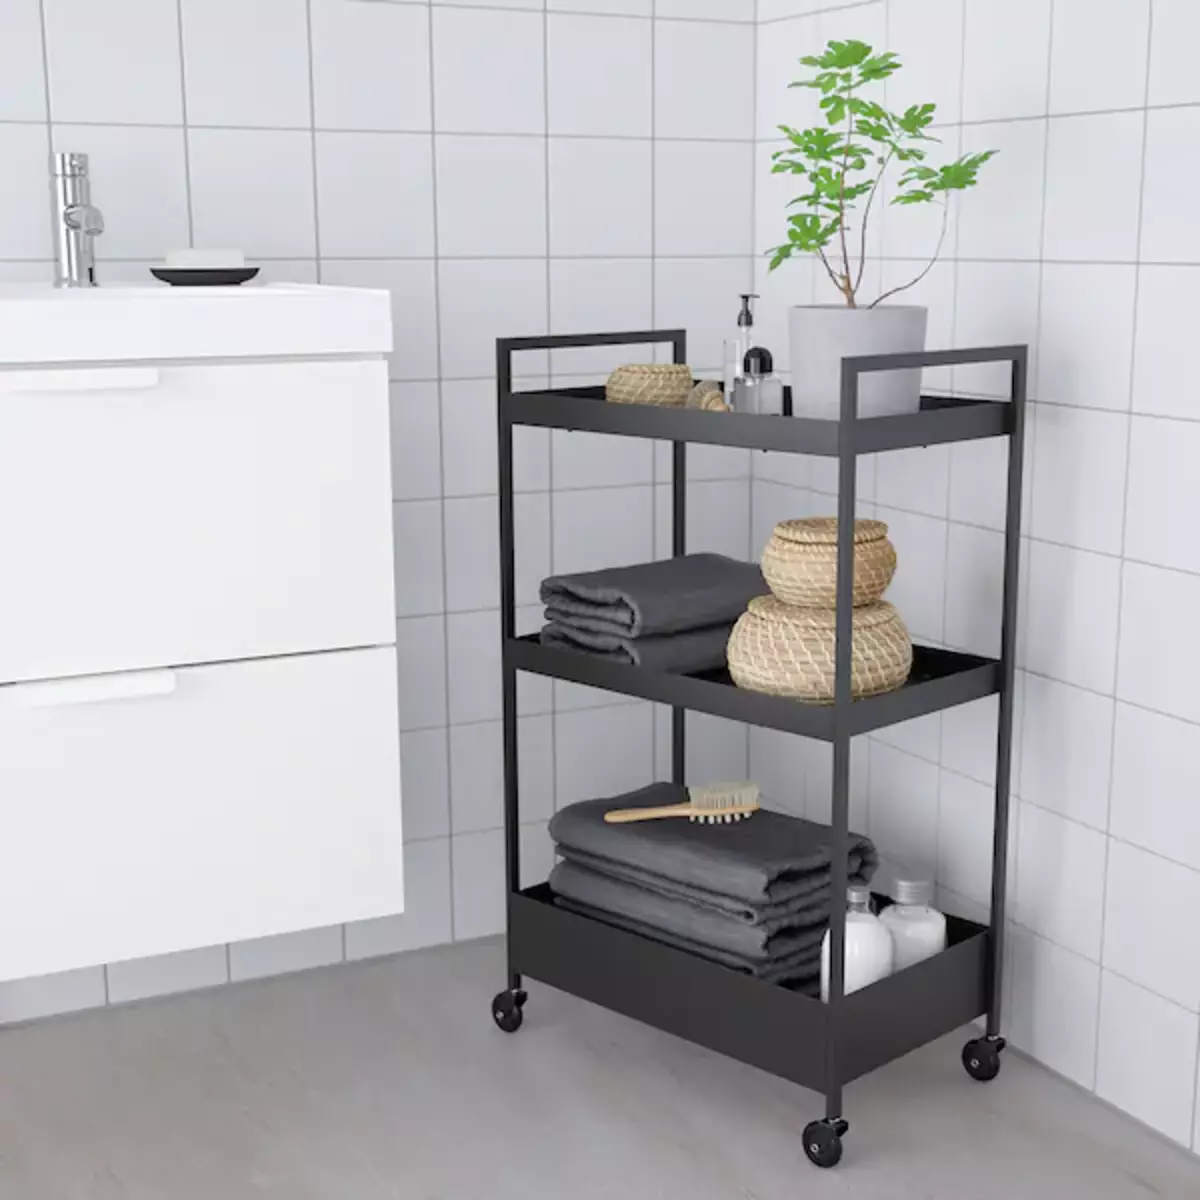 11 useful products from IKEA for those who want to make a bathroom to relax 7050_85